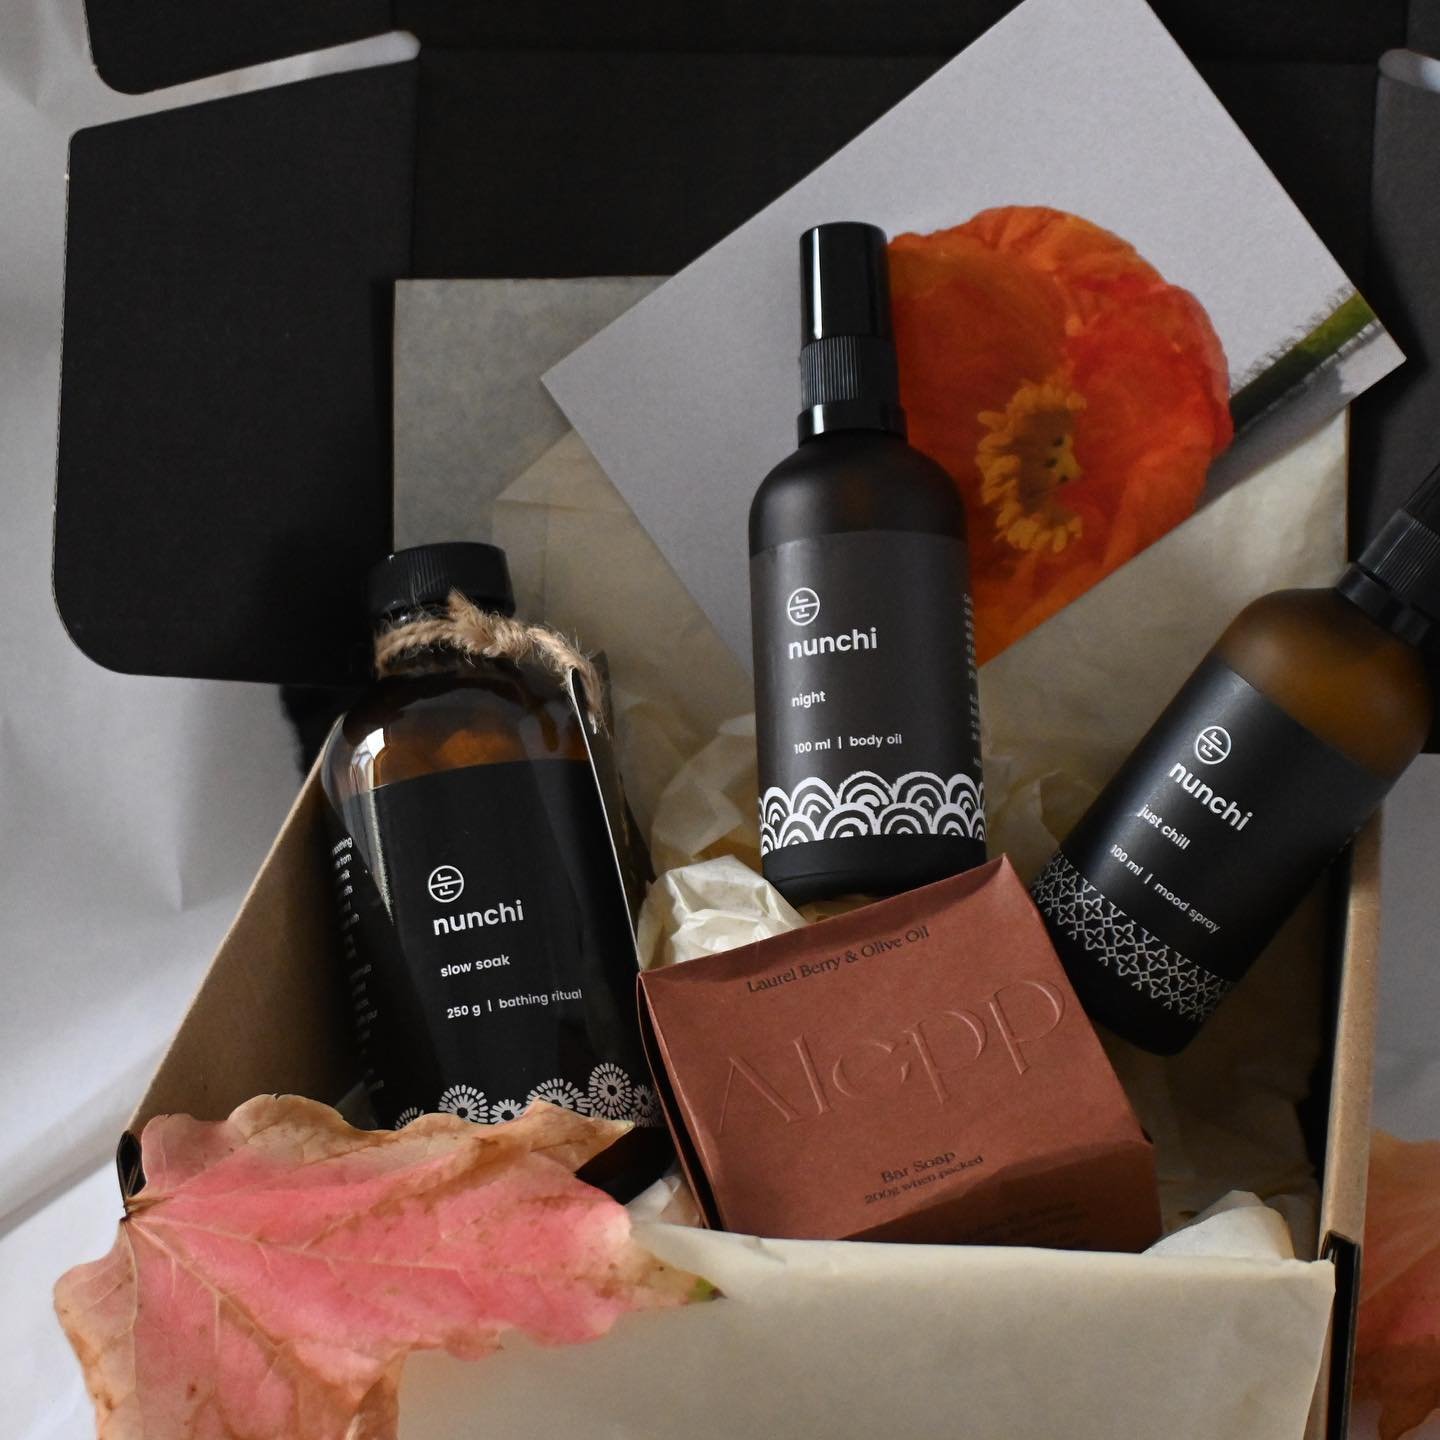 Our new gift offering :

The gift of &lsquo;SPACE&rsquo;

Space to pause,
Space to take a quiet moment,
Space to breathe deeply and slowly,
Space to soften and nourish your soul.

Includes: Slow soak bath milk, Alepp soap, Night organic body oil, Jus